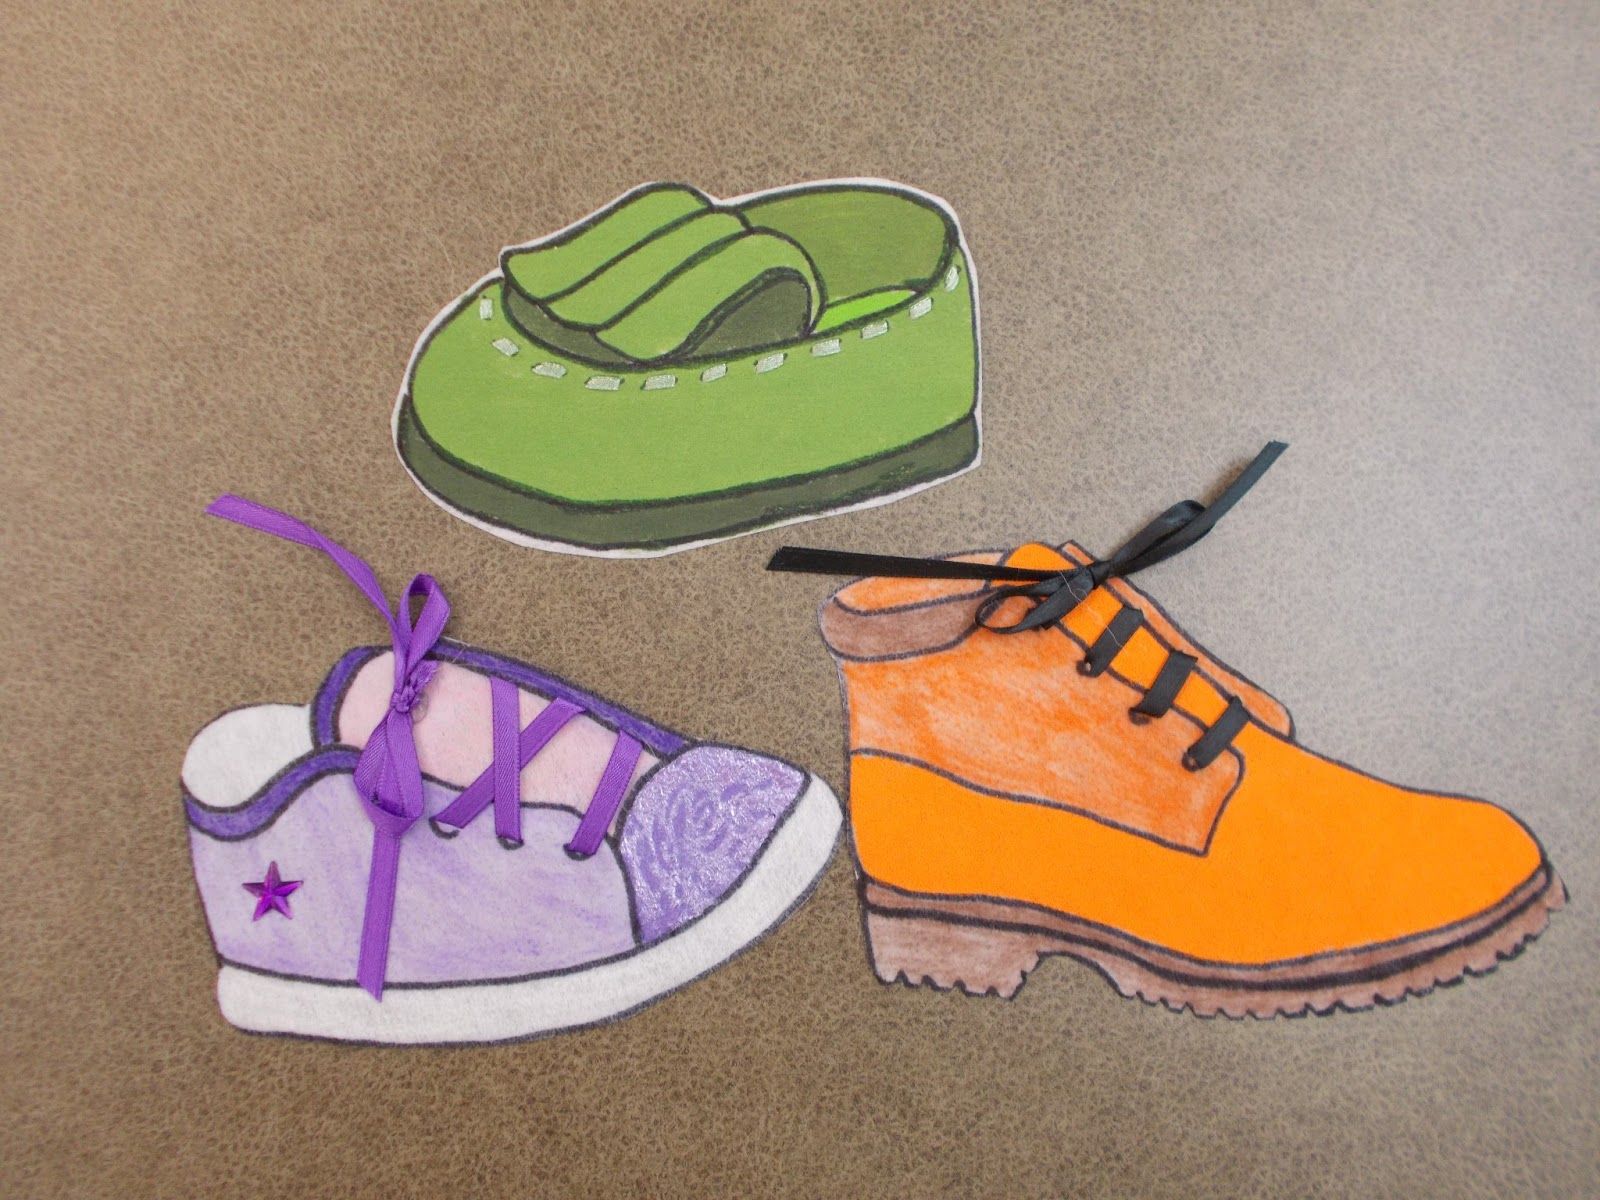     Including Shoe Ads For The Patterns I Traced And Outlined Each Shoe On